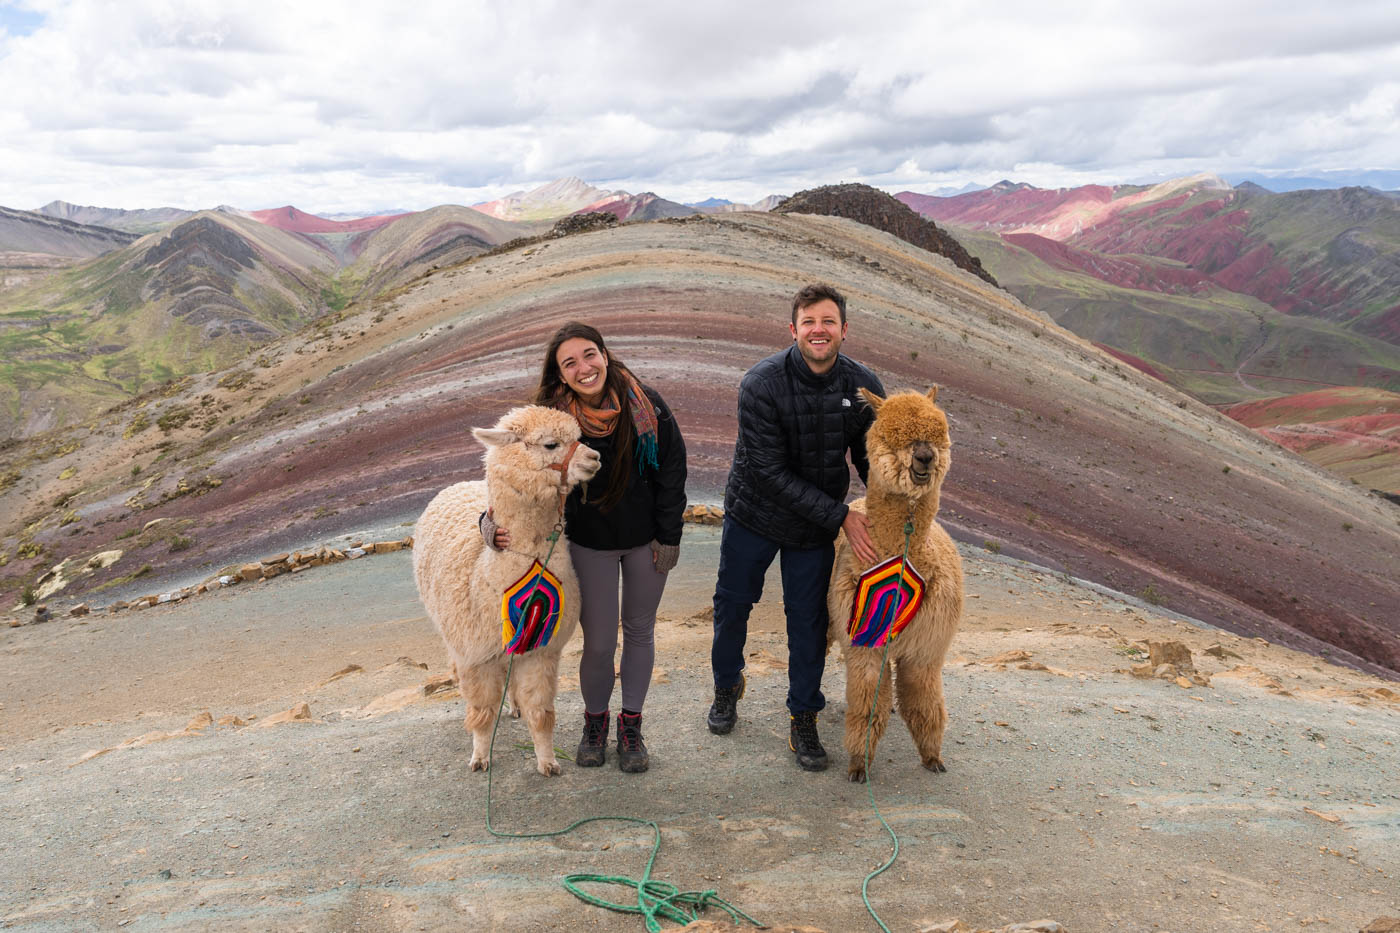 Ryan and Sara in hiking gear at the summit of Palcoyo rainbow mountain whilst hugging two fluffy alpacas.